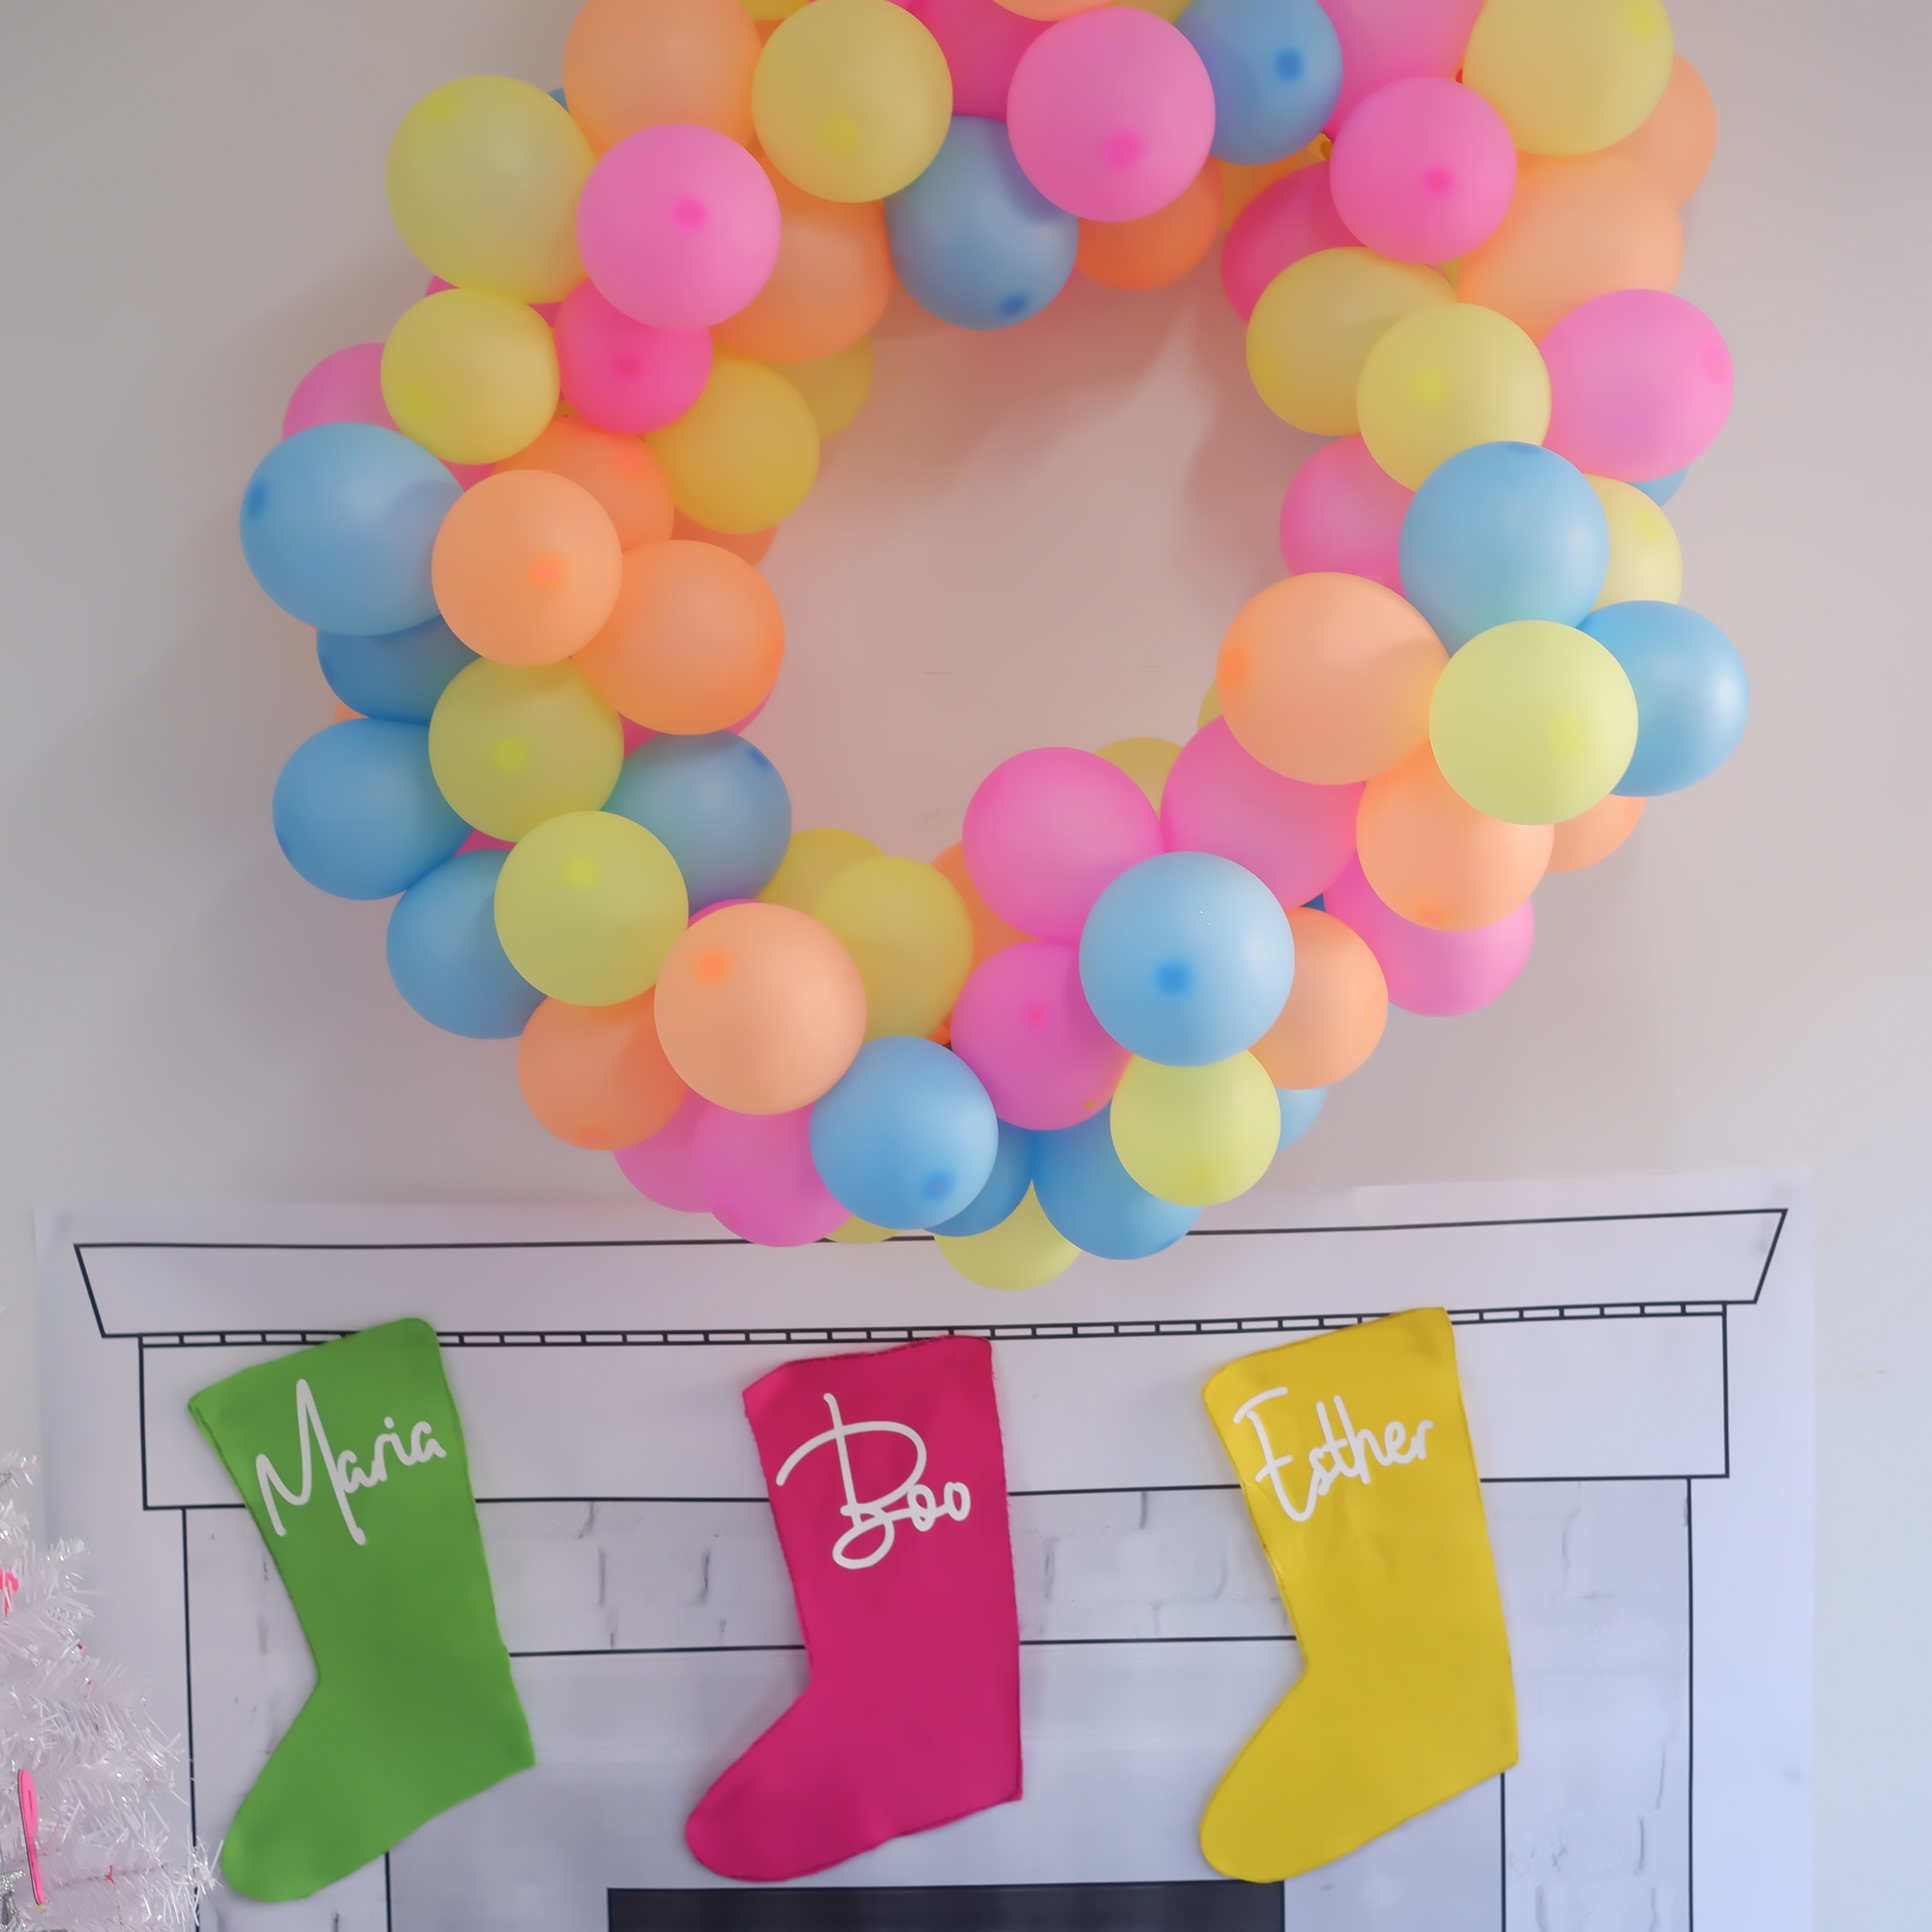 Neon Christmas party with balloon wreath